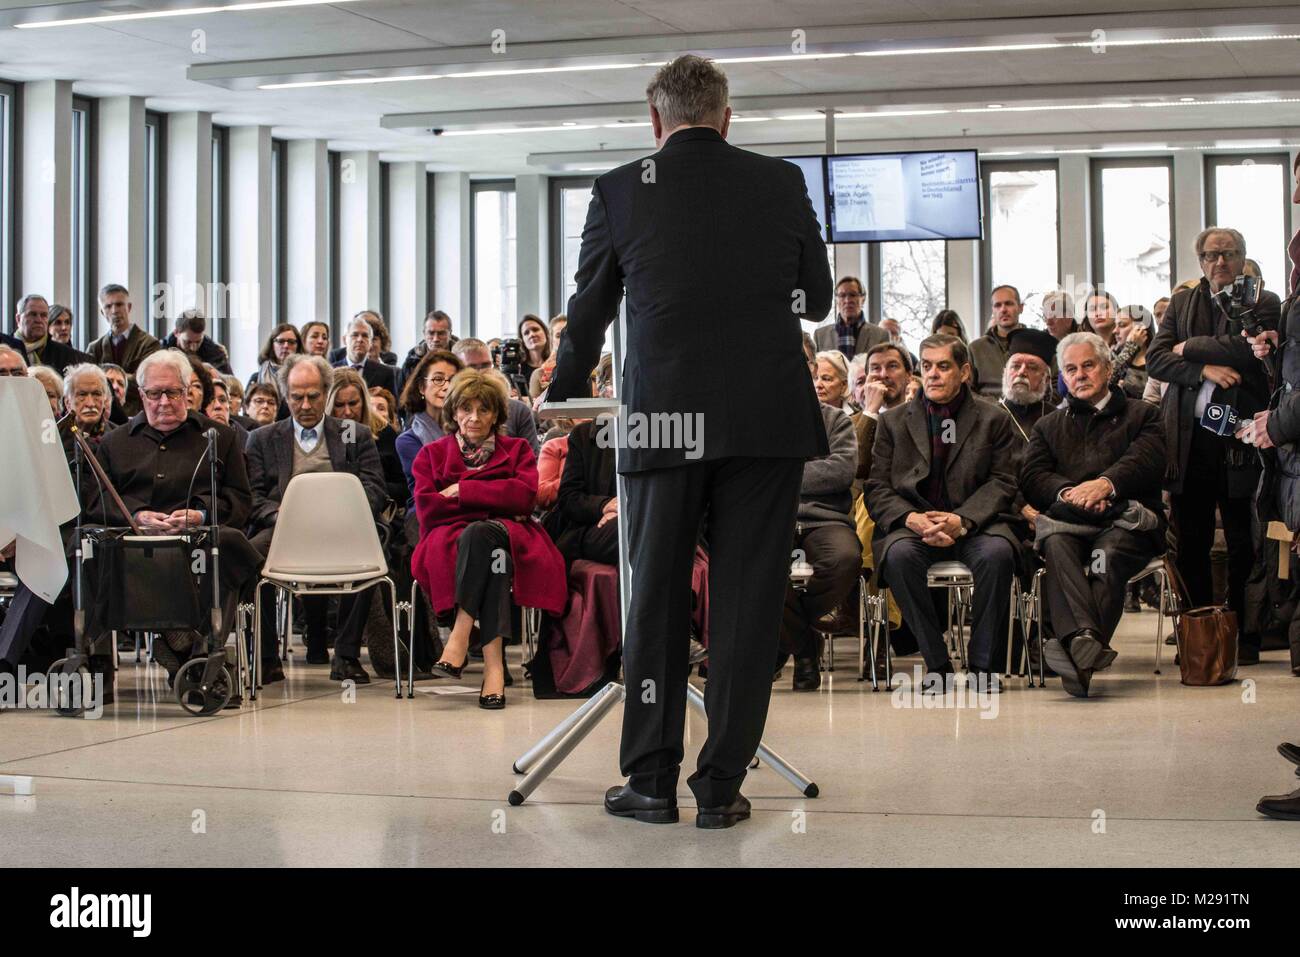 Munich, Bavaria, Germany. 6th Feb, 2018. Mayor Dieter Reiter addressing the guests, with Charlotte Knobloch in the first row. The City of Munich, Germany dedicated the plaza adjacent to the National Socialism Documentation Center (NS-Dokumentationszentrum) building to Holocaust survivor Max Mannheimer. Mannheimer was an author, painter, and prolific speaker about the experience. He and his brother were the only family members to survive. Mannheimer was born on Feb. 6, 1920 in Northern Moravia and died on Sept. 23, 2016. Among the speakers were Munich City Mayor Dieter Reiter, Sister E Credit:  Stock Photo